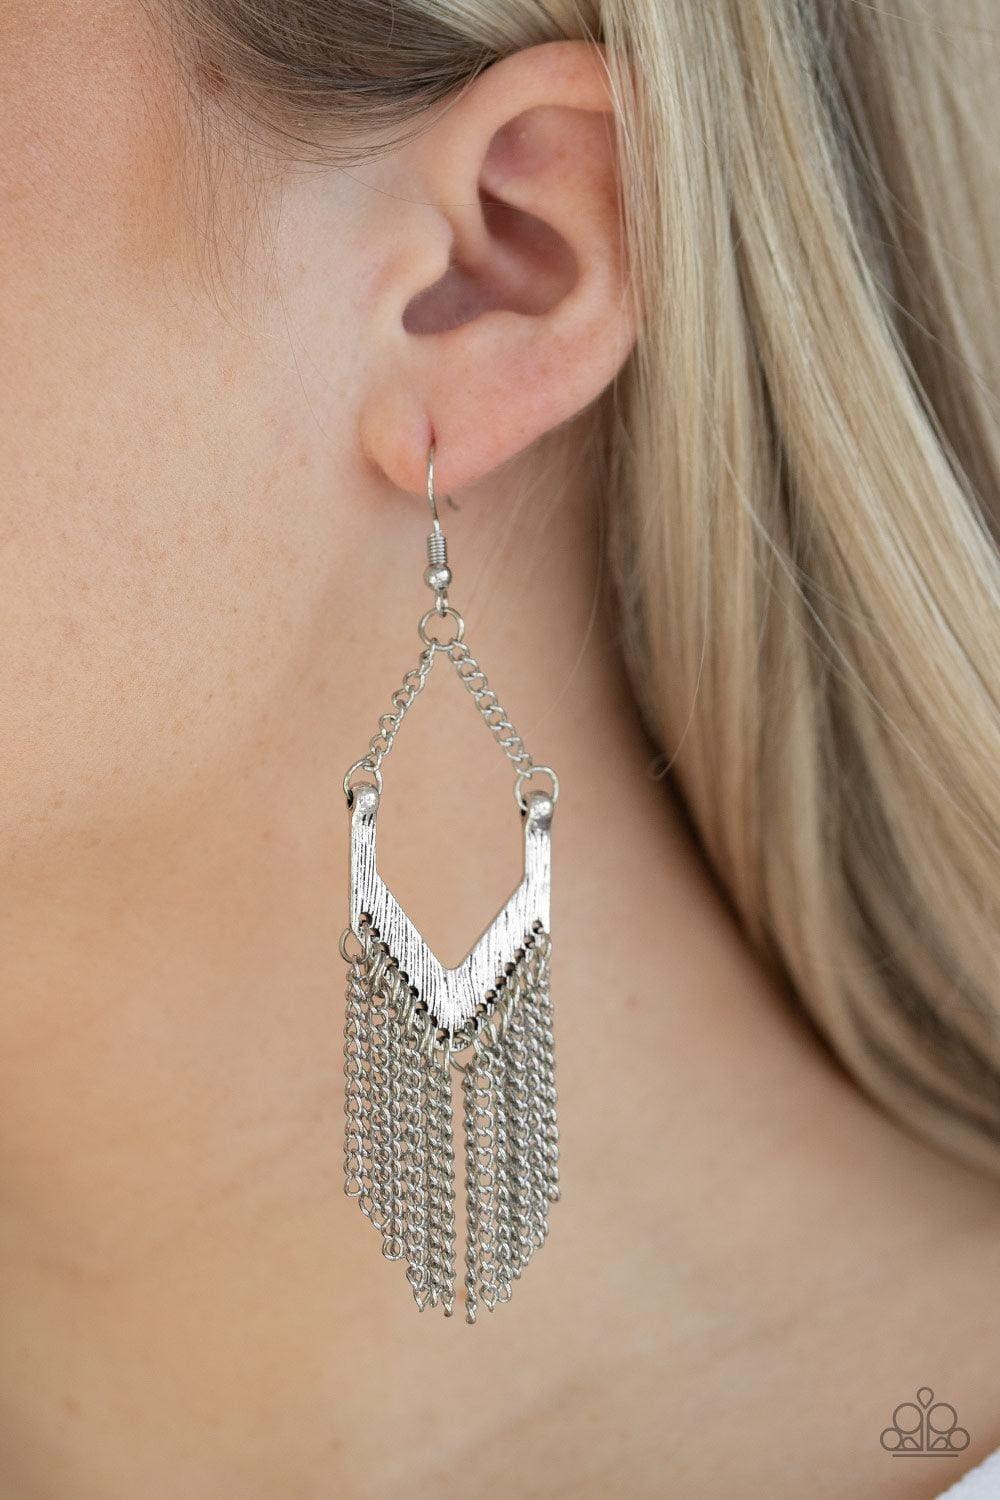 Paparazzi Accessories - Unchained Fashion - Silver Earrings - Bling by JessieK